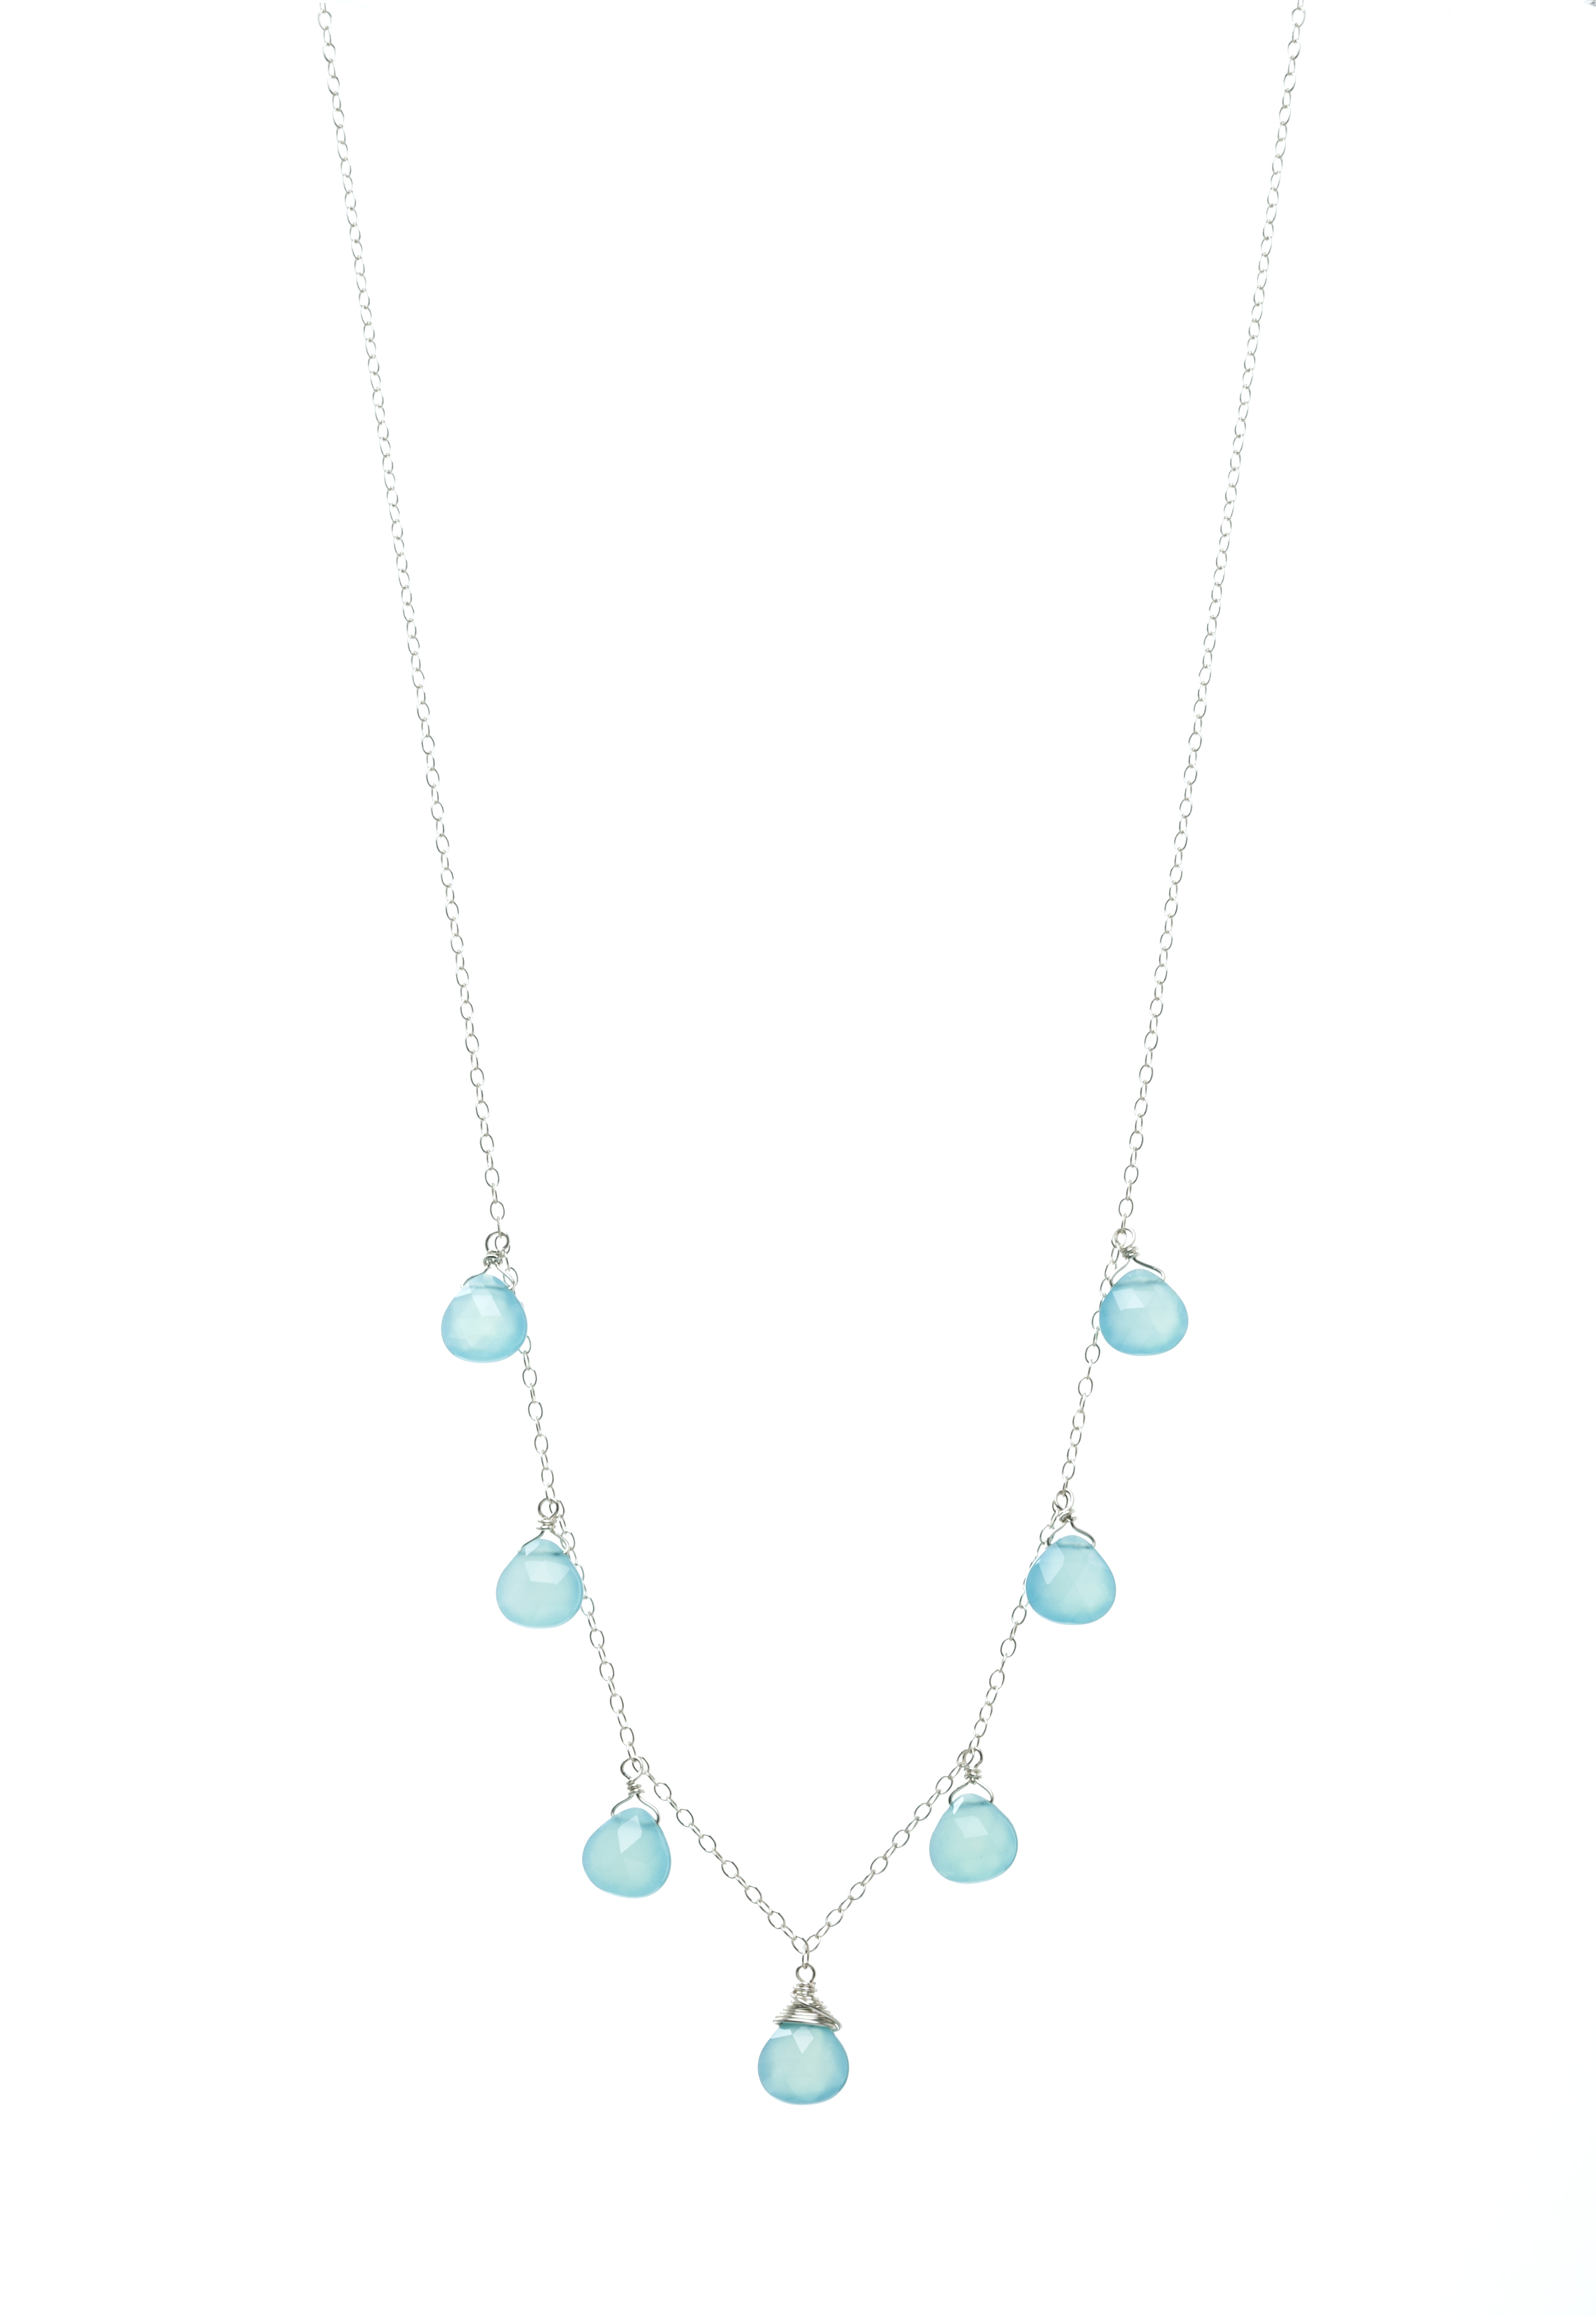 Peruvian Chalcedony Sterling Silver Necklace